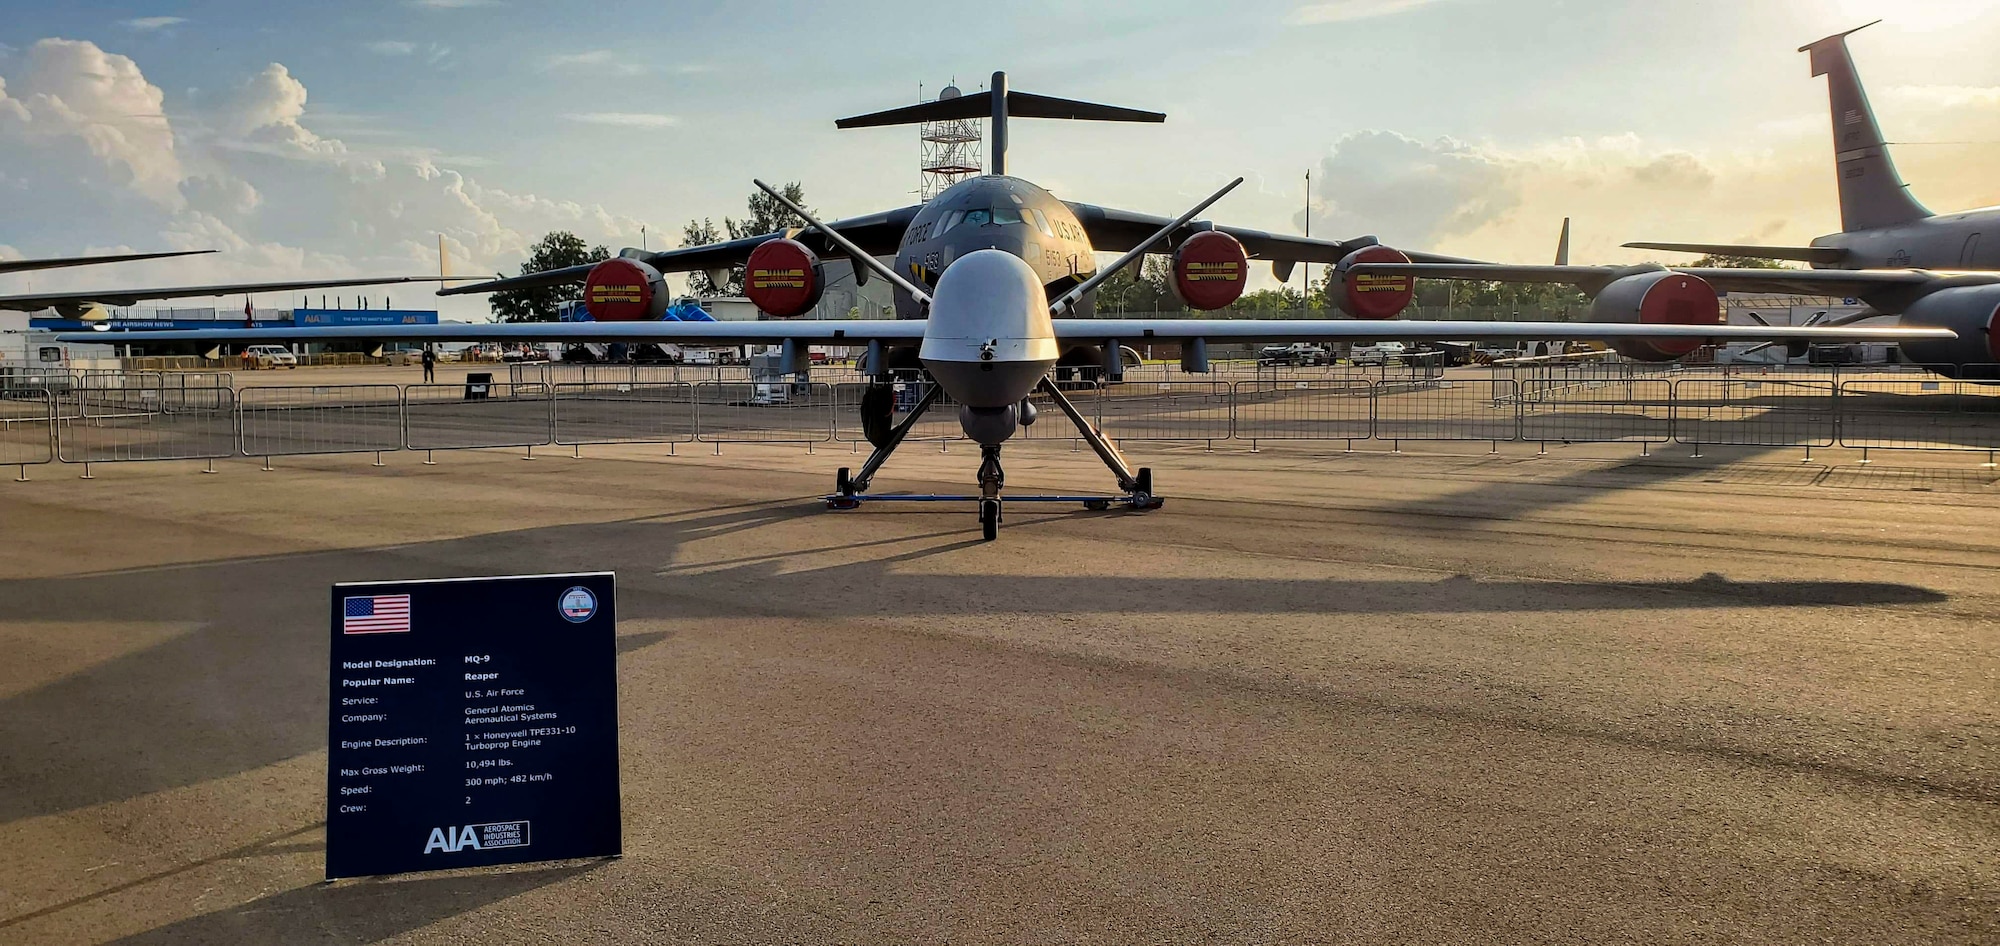 An MQ-9 Reaper sits on display at Singapore Airshow.